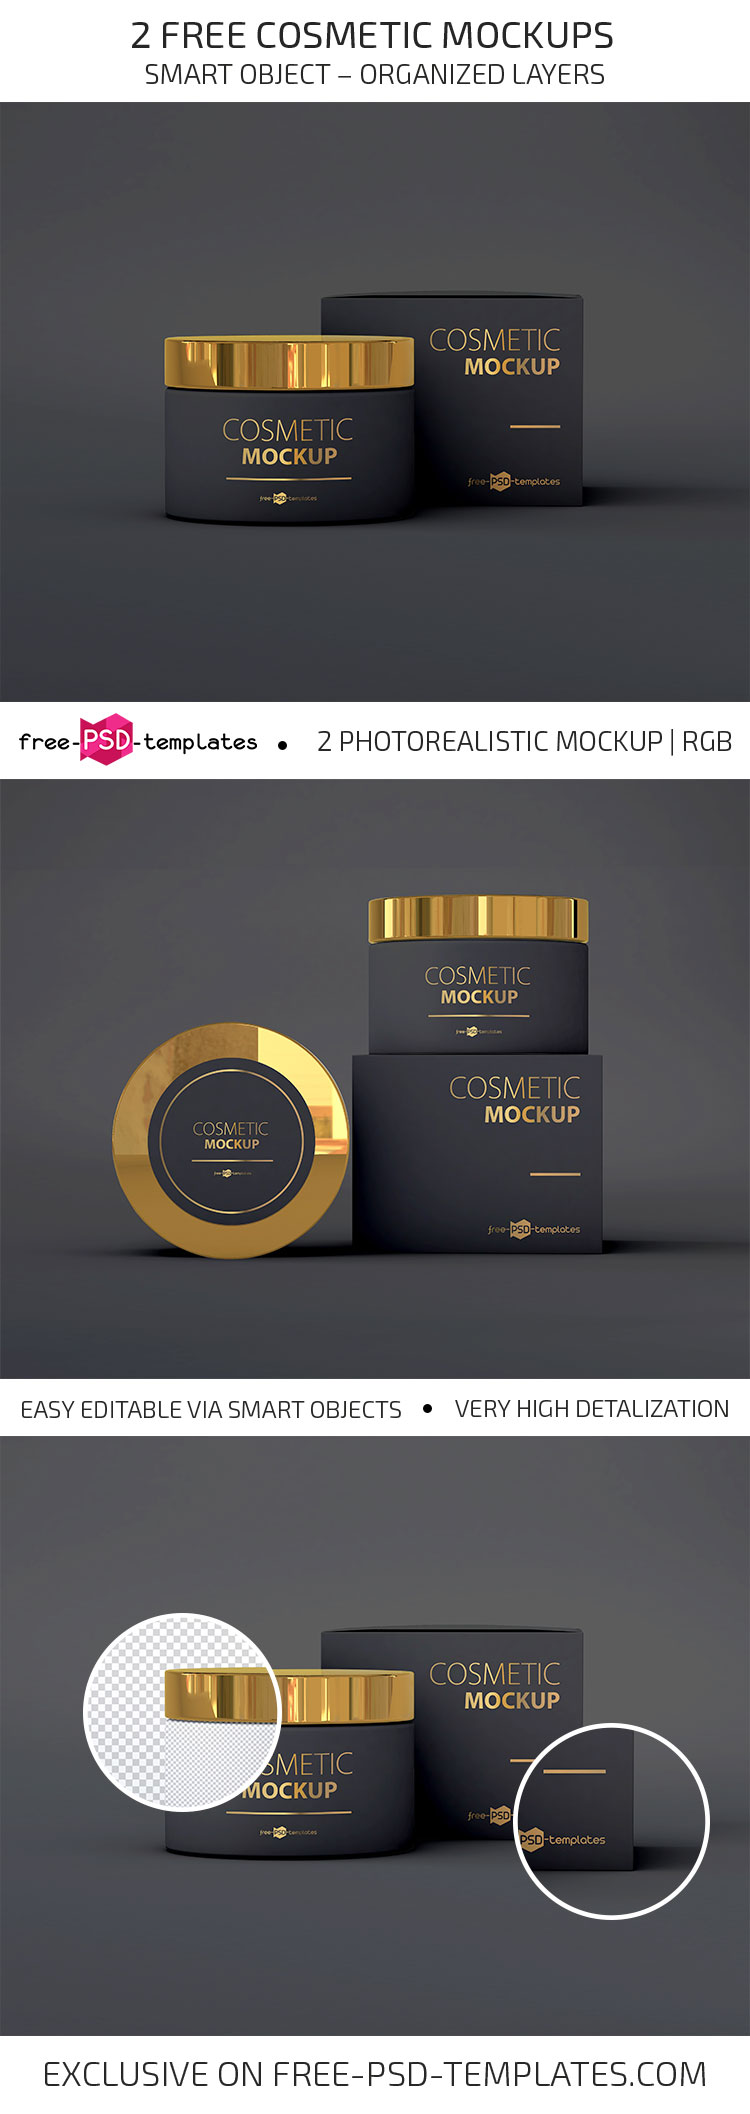 Download 2 Free Cosmetic Mockups | Free PSD Templates